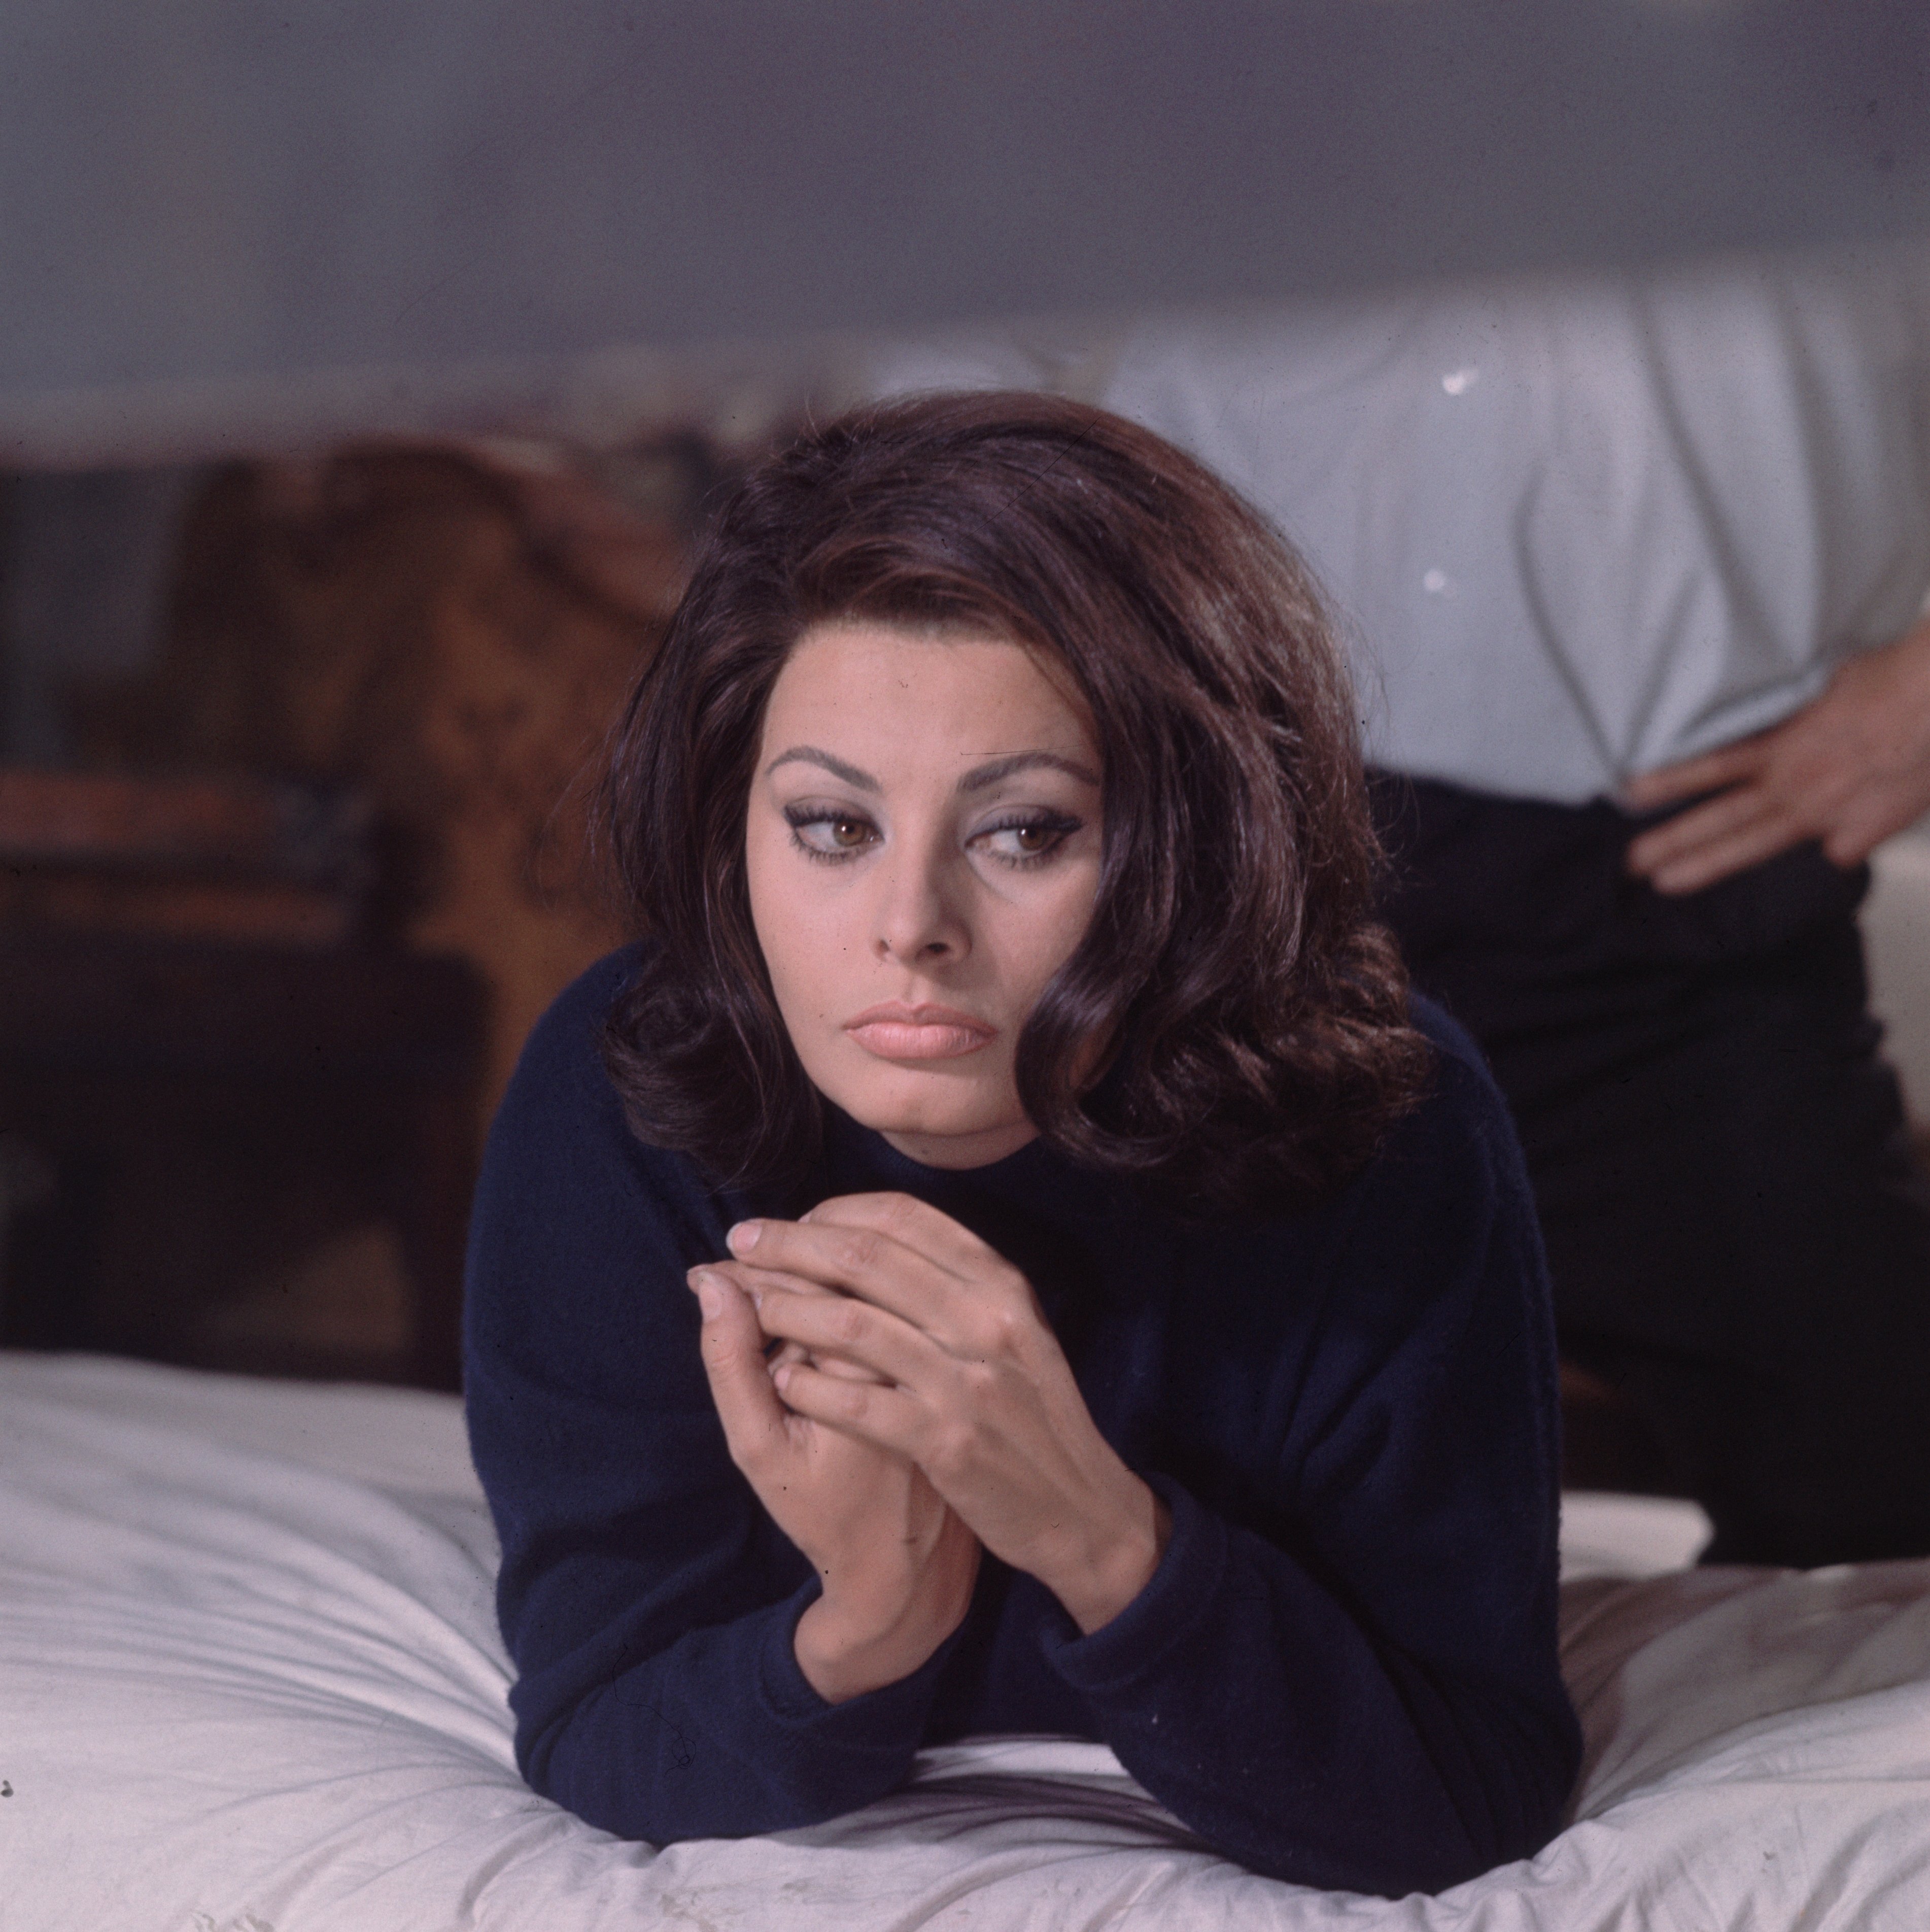 Sophia Loren lays on a bed wearing a blue turtleneck sweater while an unidentified man stands behind her in November 1964, London, England. | Photo: Getty Images